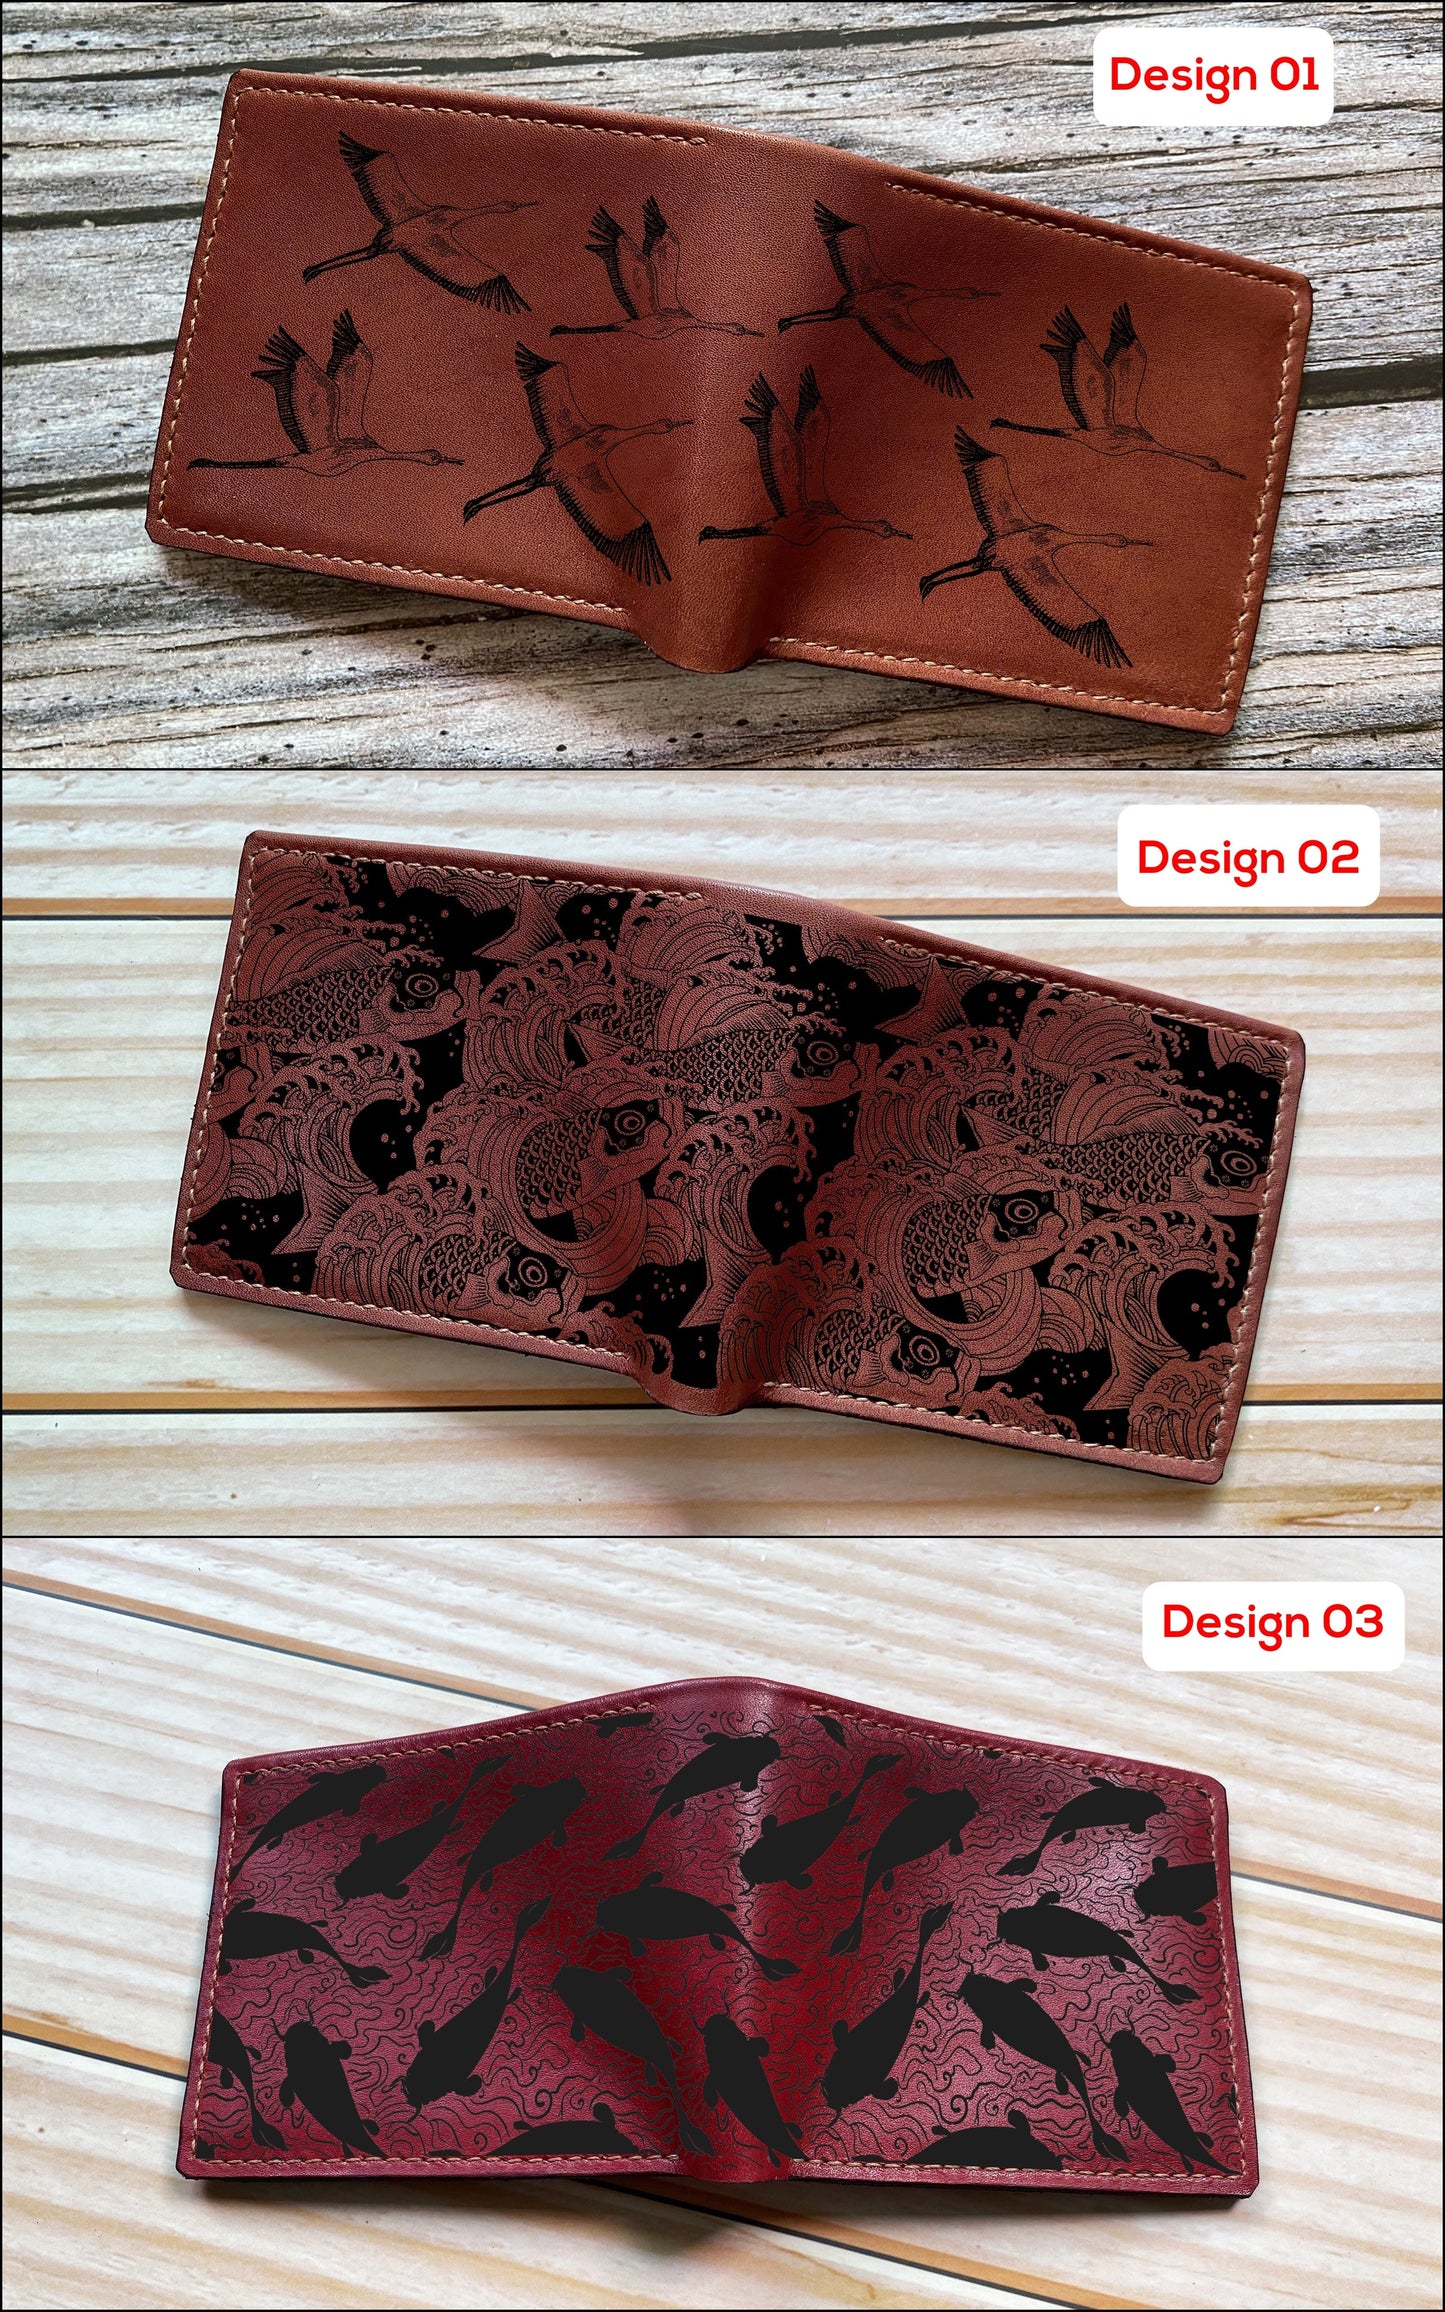 Mayan Corner - Personalized leather koi wallet, koi fish pattern wallet, japanese tradition art, leather anniversary present for birthday, christmas